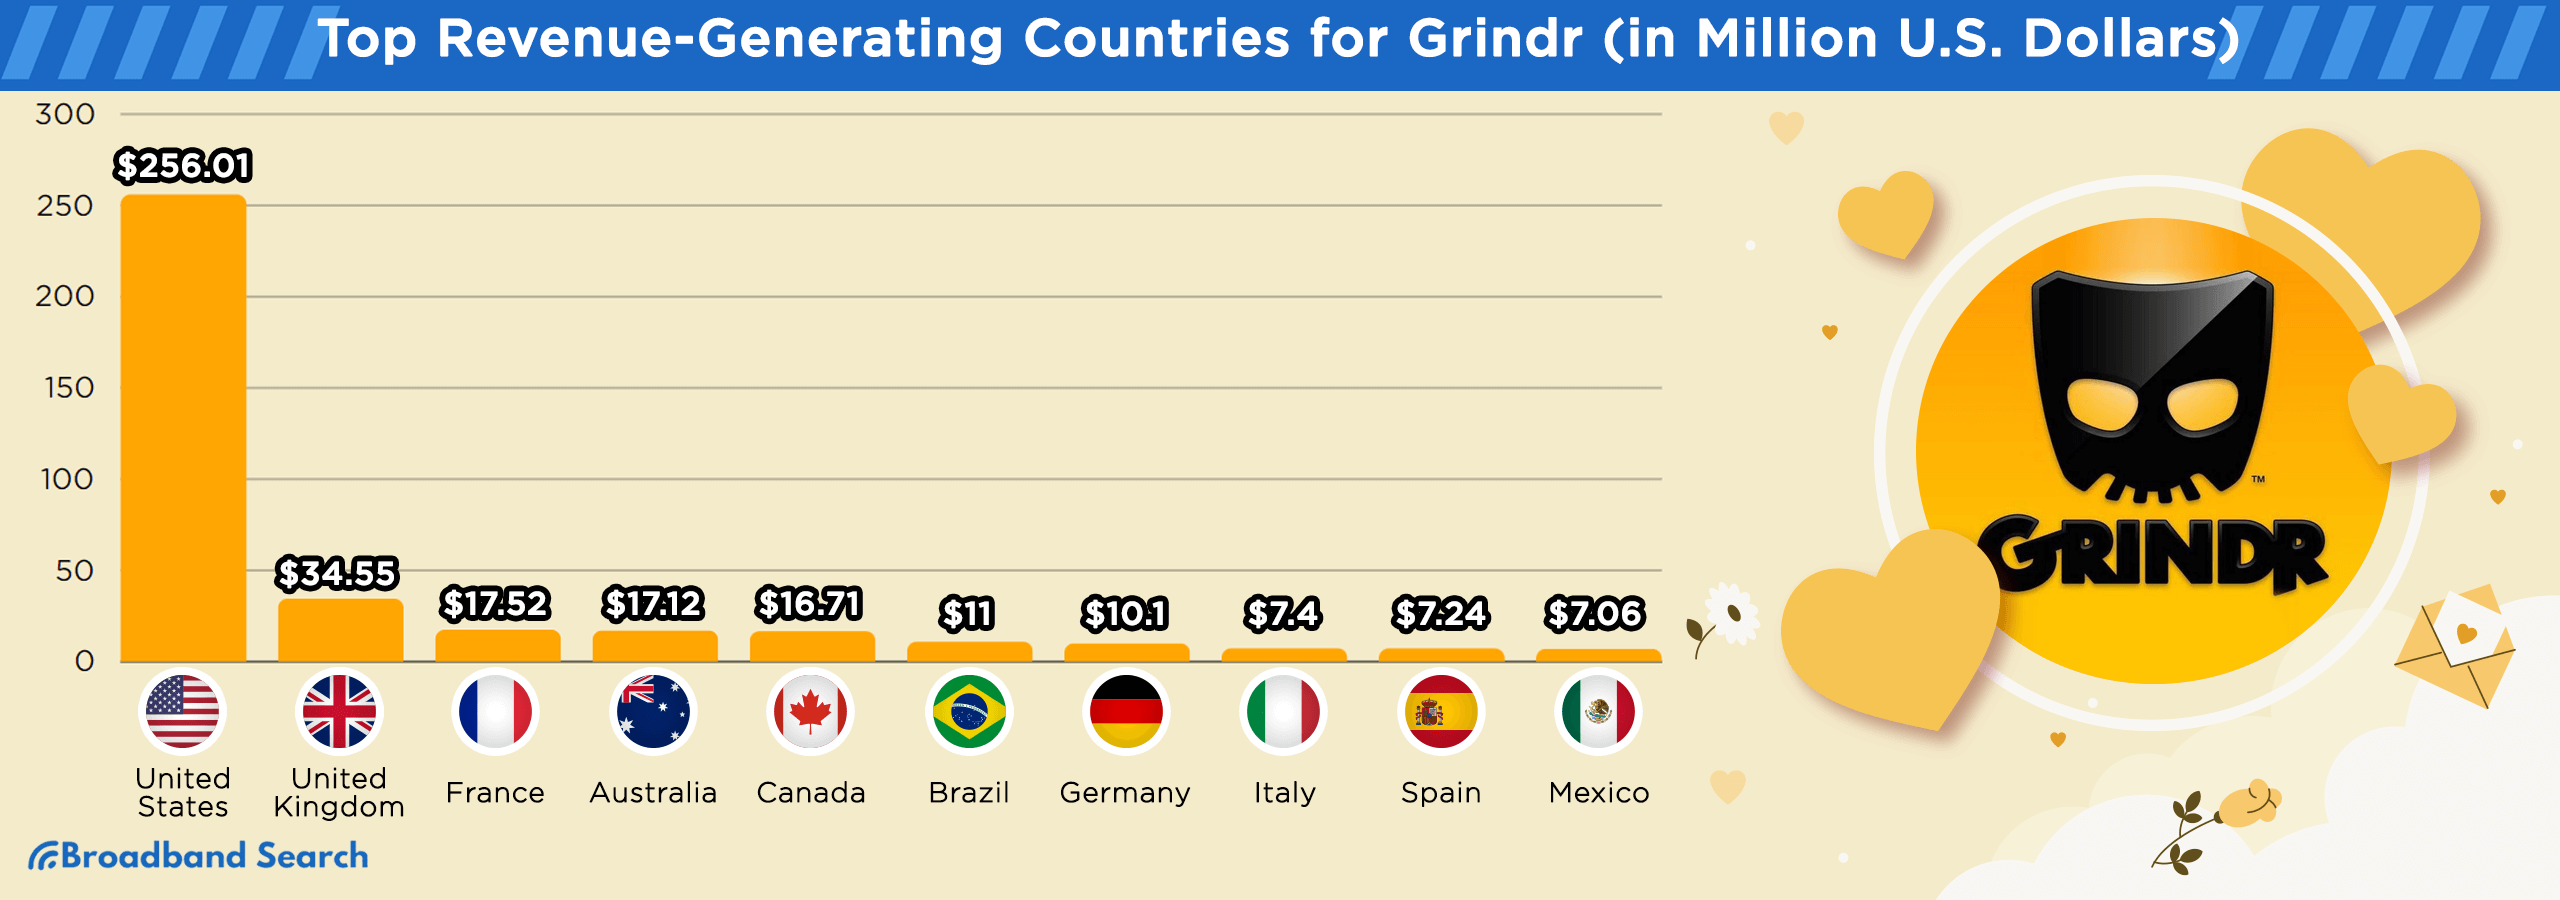 Top revenue generating countries for grindr represented in millions of U.S dollars